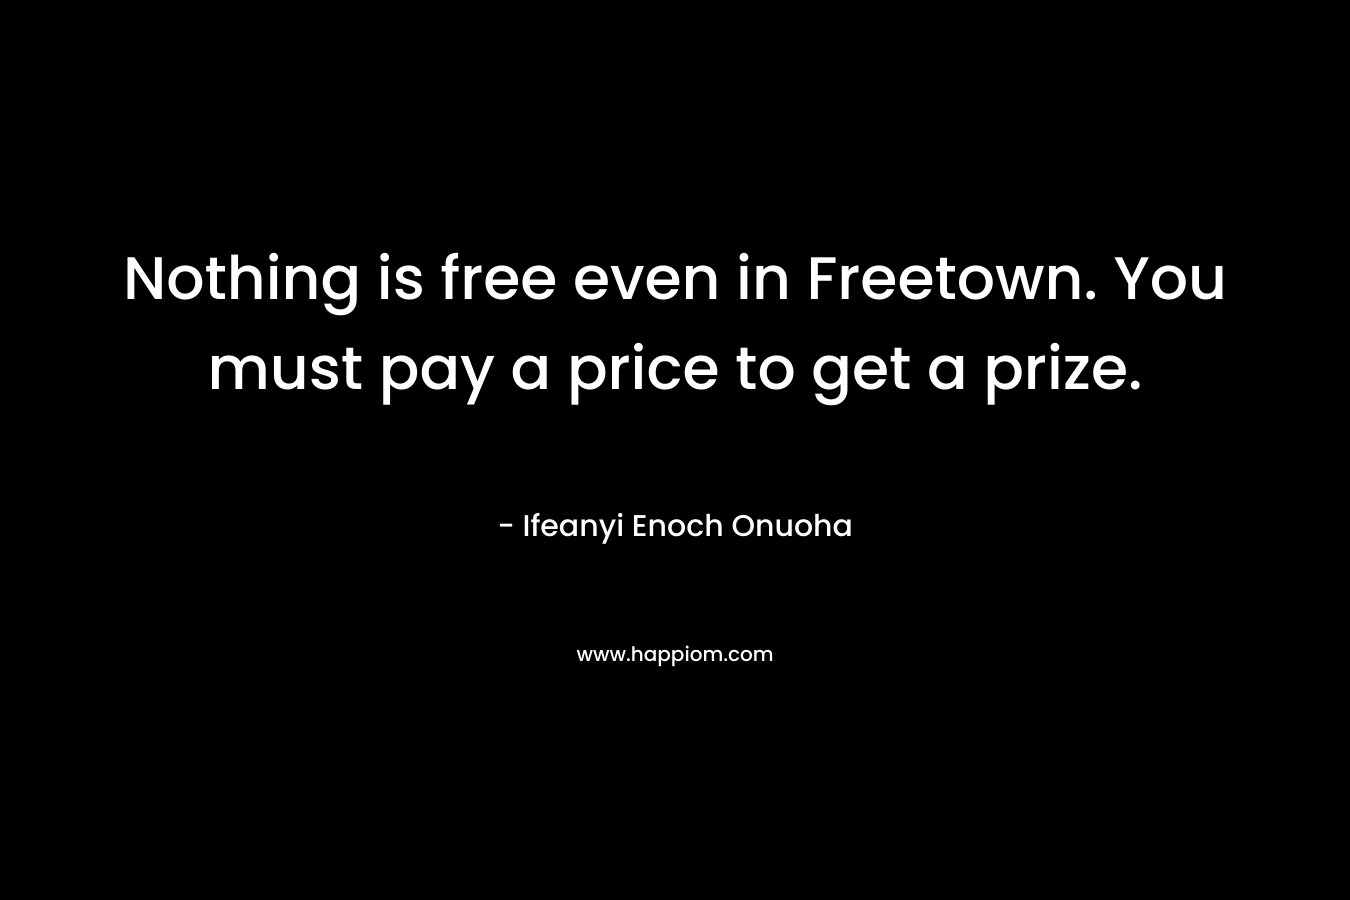 Nothing is free even in Freetown. You must pay a price to get a prize.